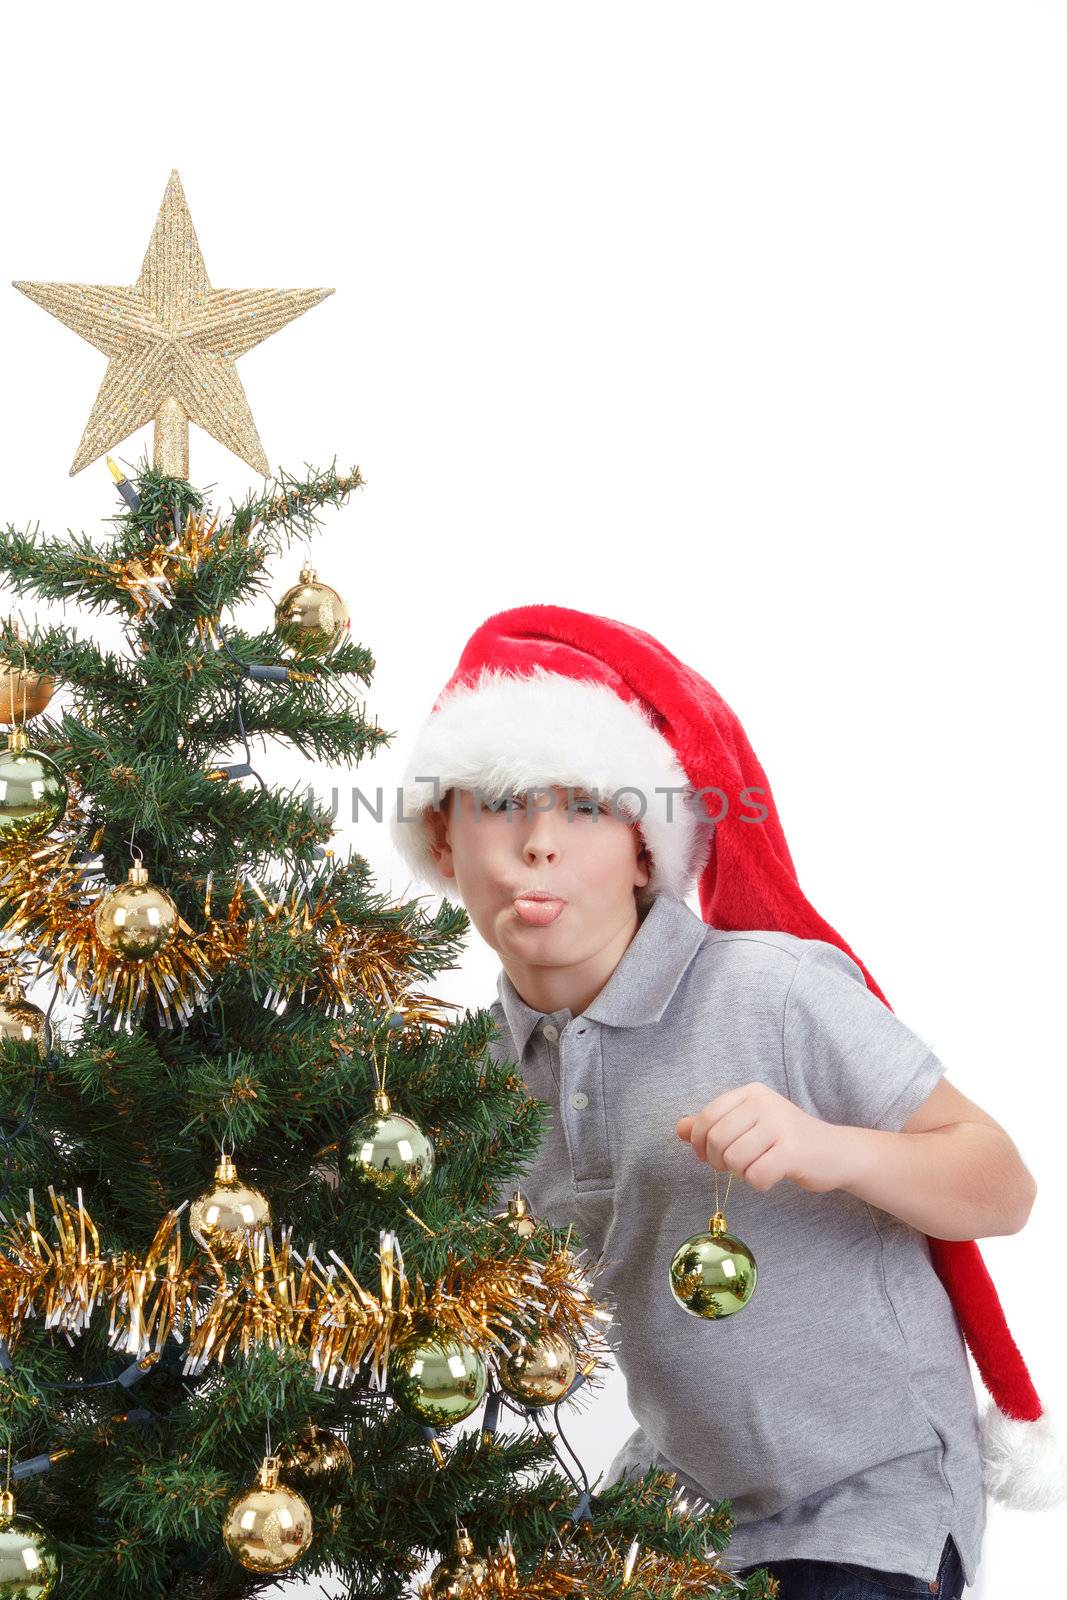 Boy with santa hat sticking out tongue at  the Christmas tree on white background